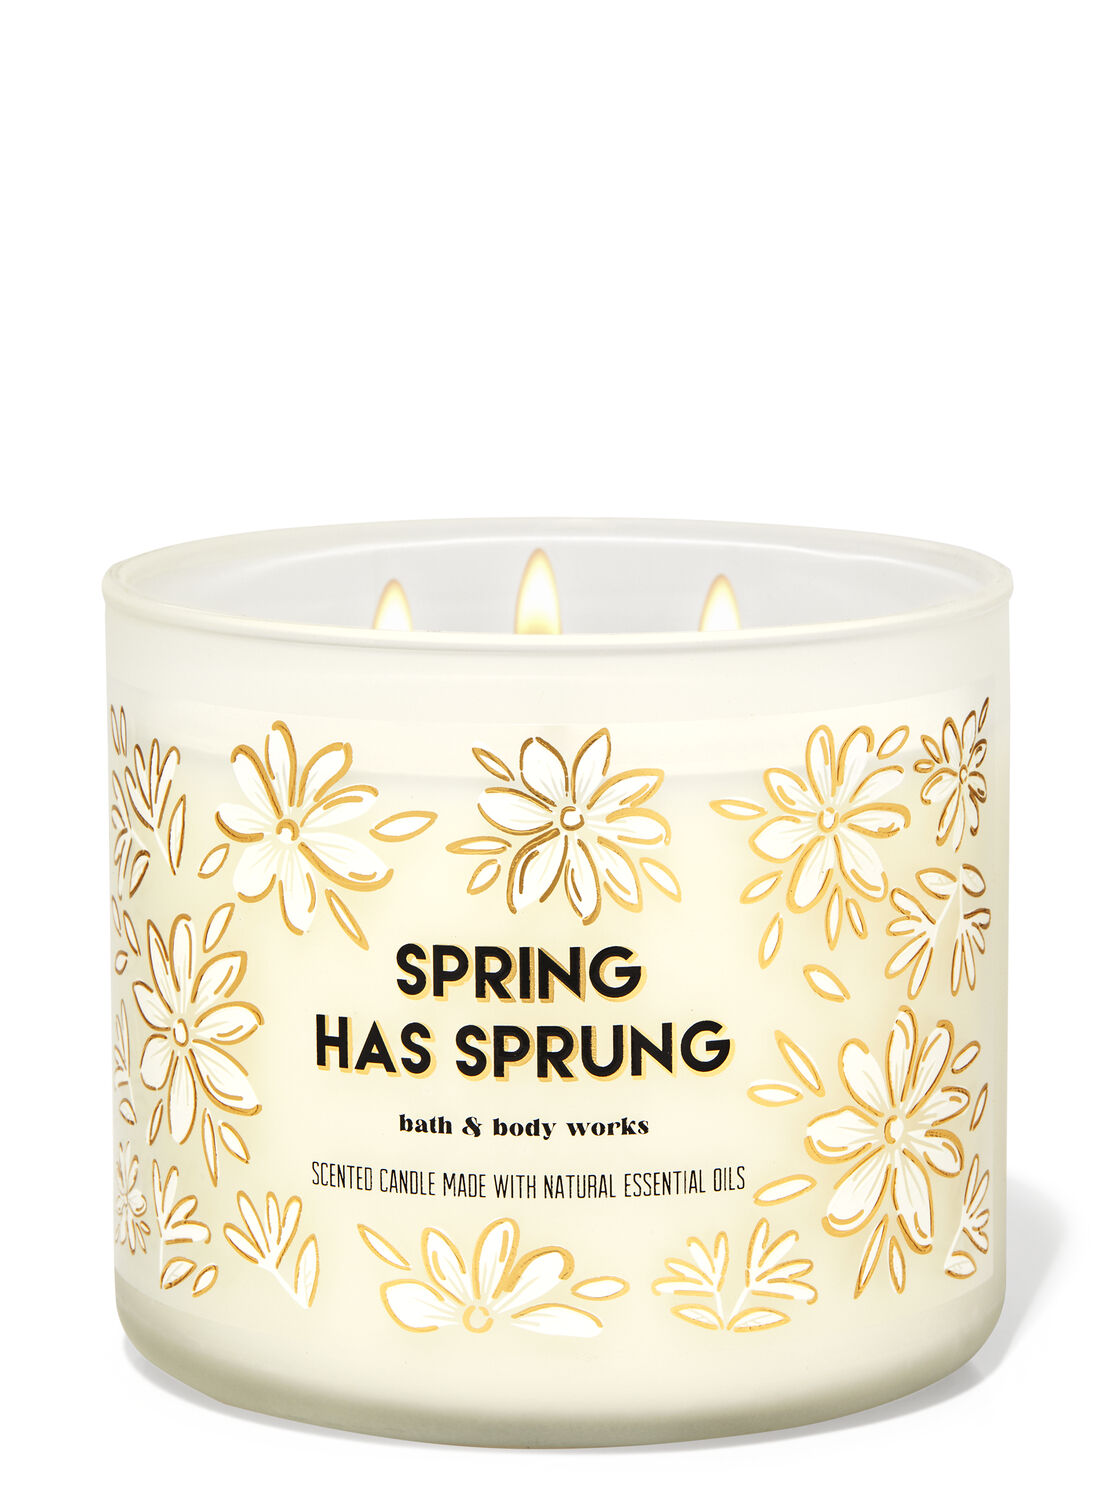 Spring Has Sprung 3-Wick Candle | Bath & Body Works